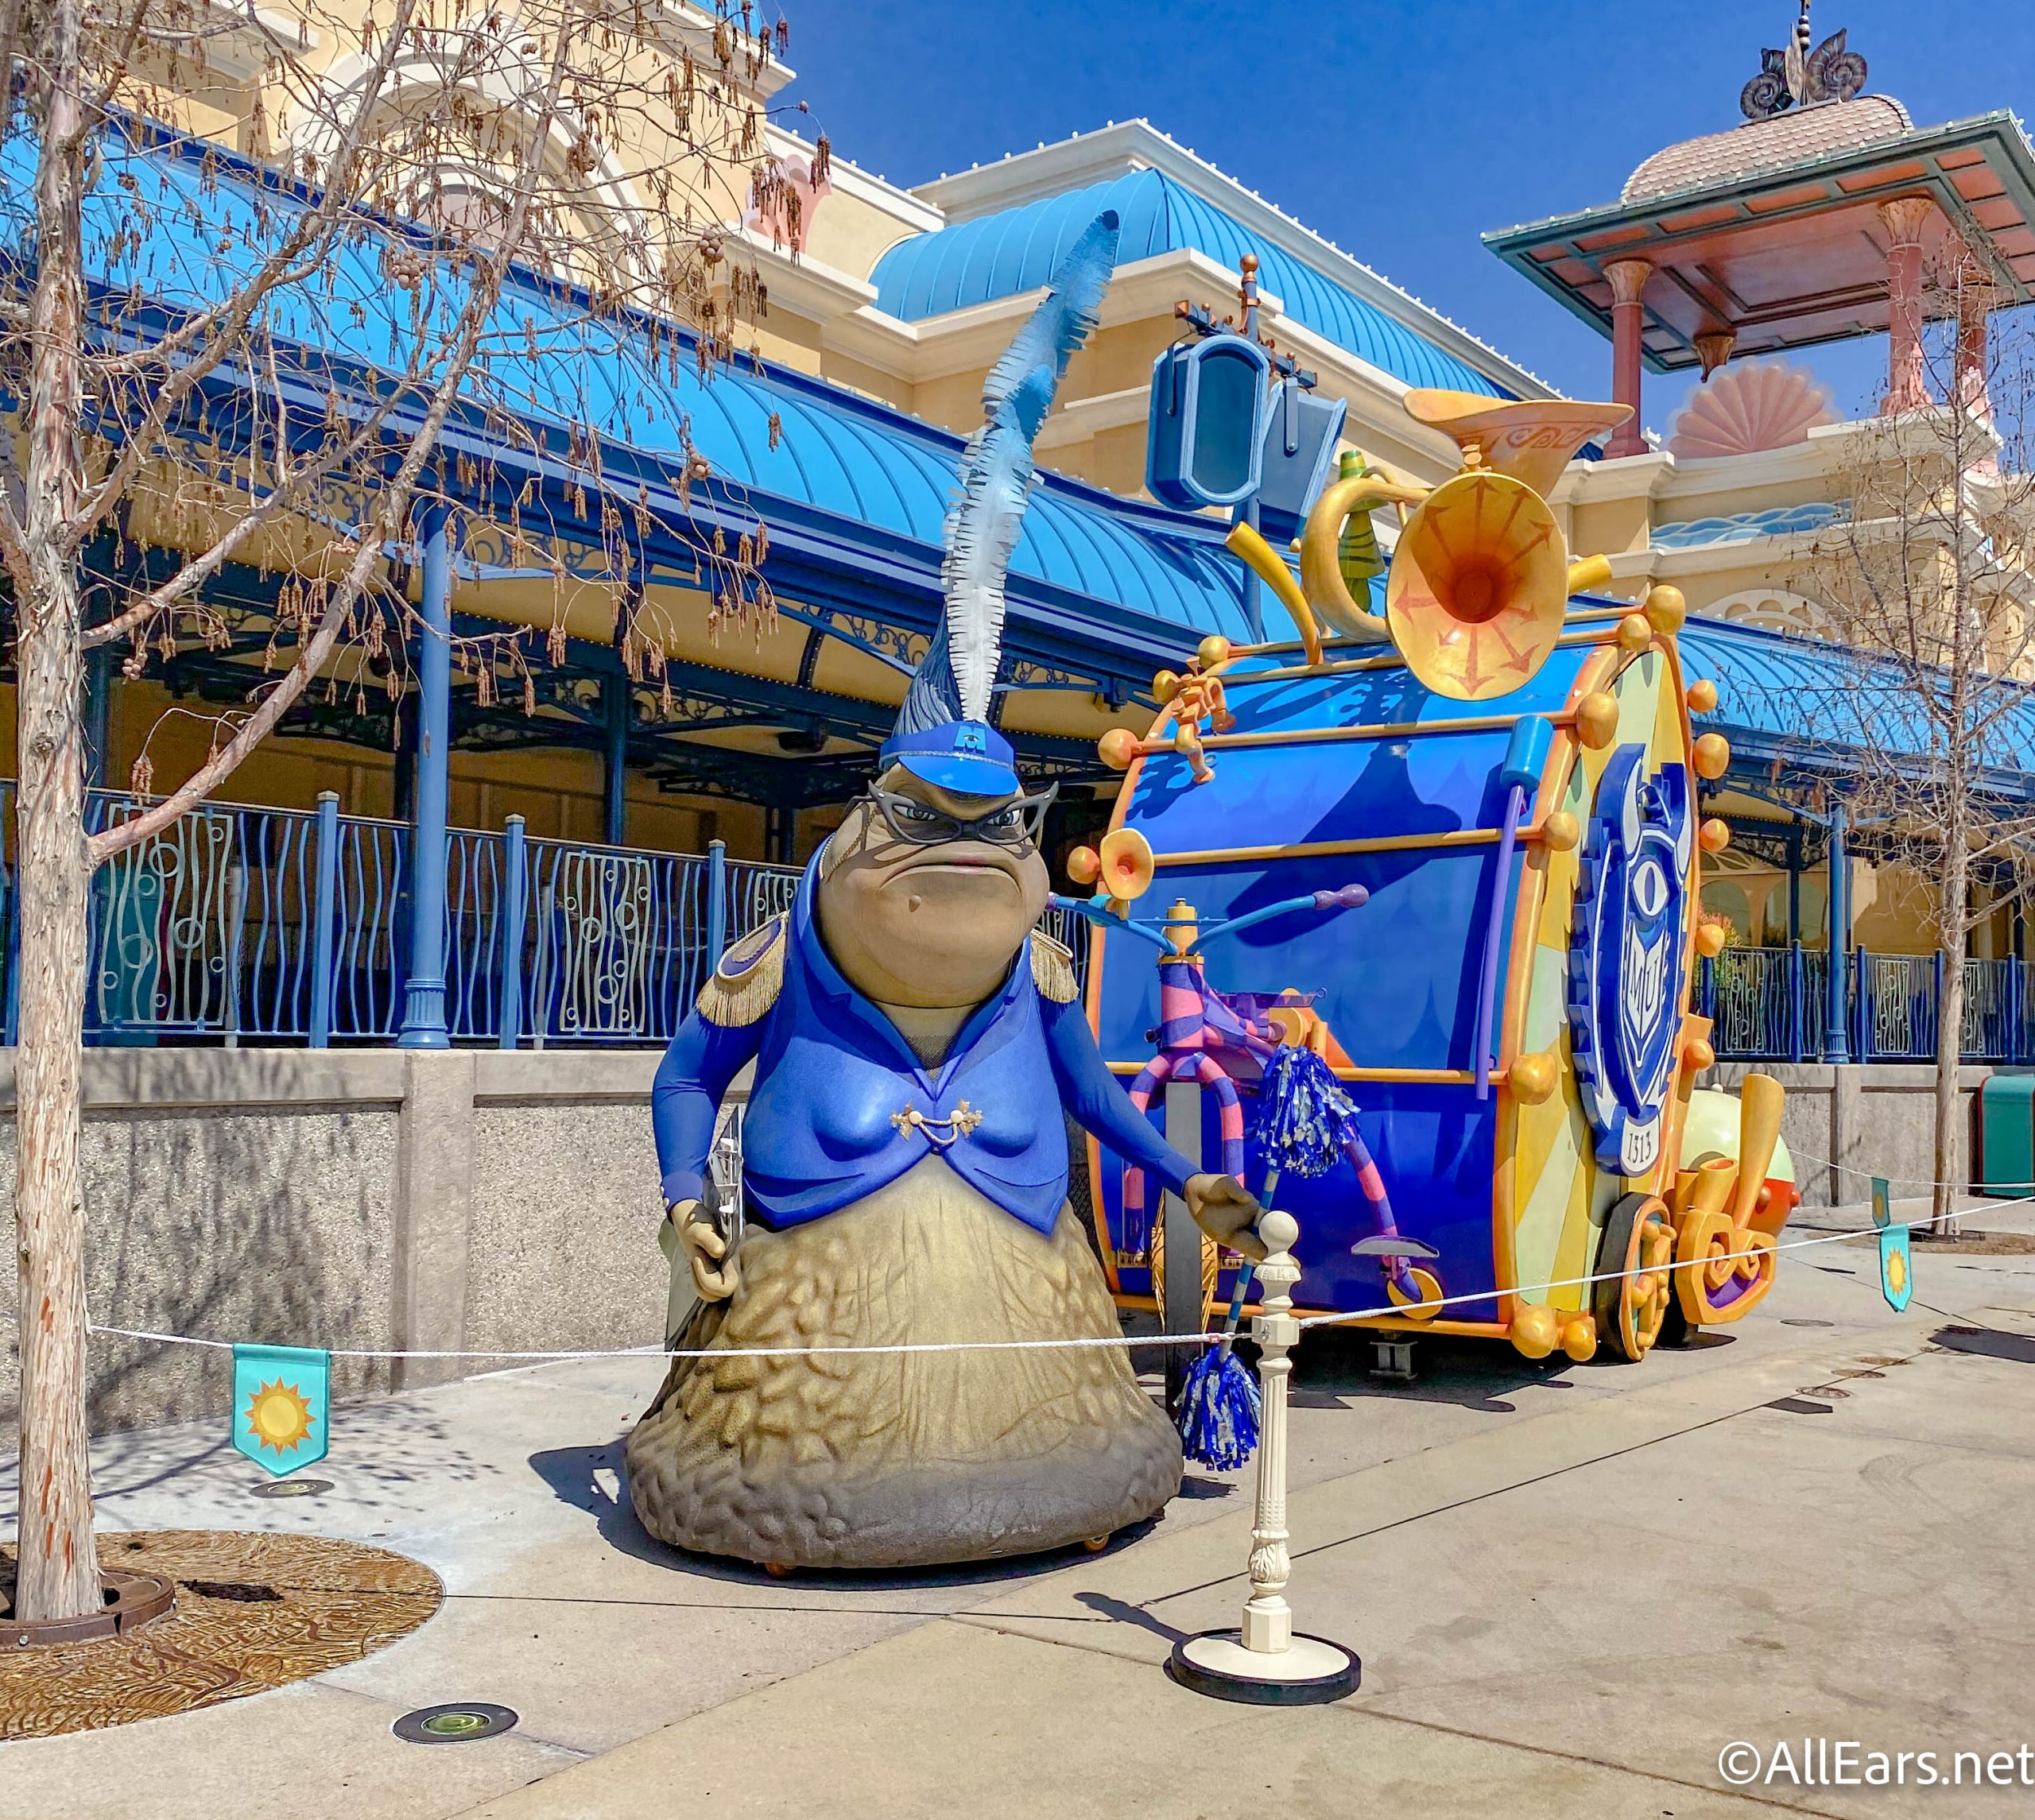 https://allears.net/wp-content/uploads/2021/03/dlr-2021-california-adventure-a-touch-of-disney-characters-monsters-inc-roz-scaled.jpg